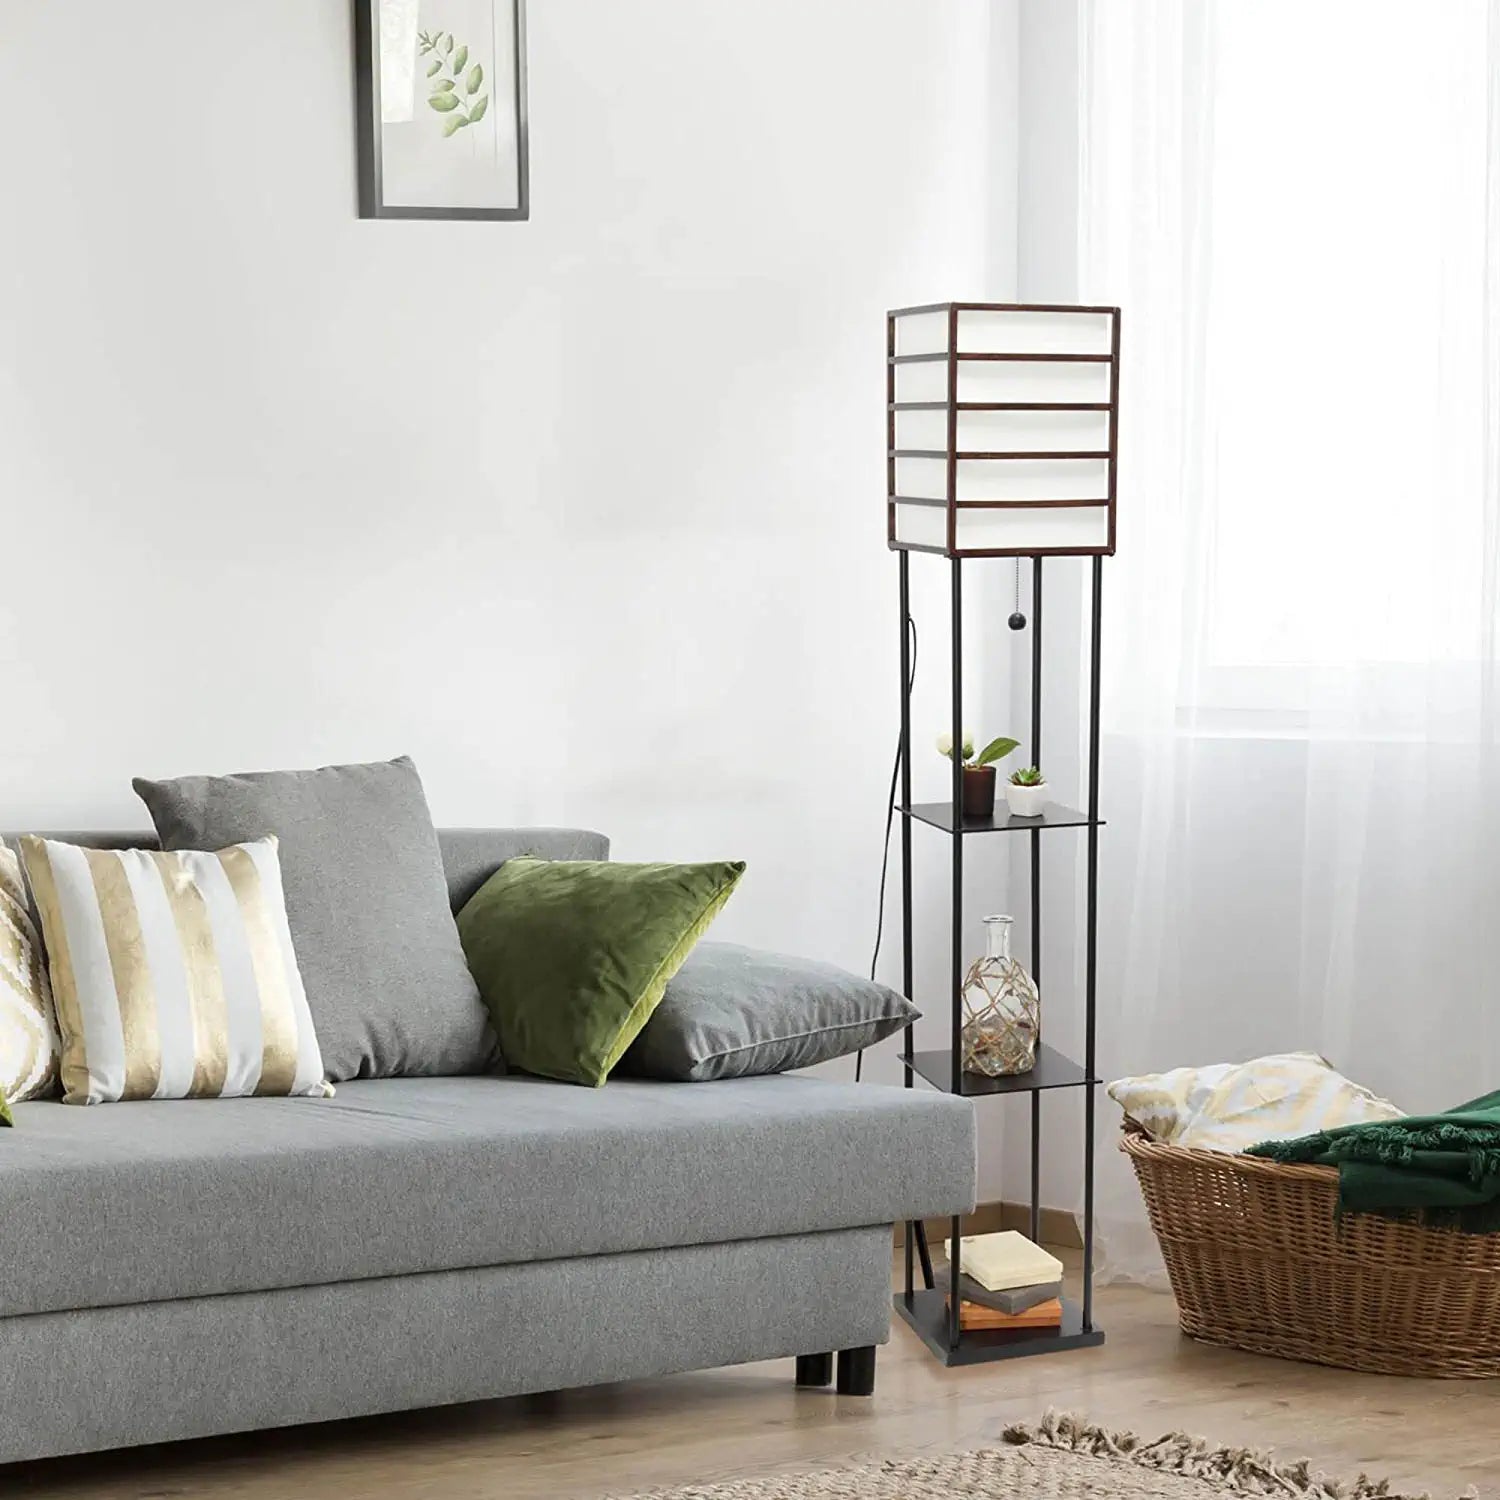 Lalia Home 1 Light Metal Etagere Floor Lamp with Storage Shelves and Linen Shade - Dark Wood